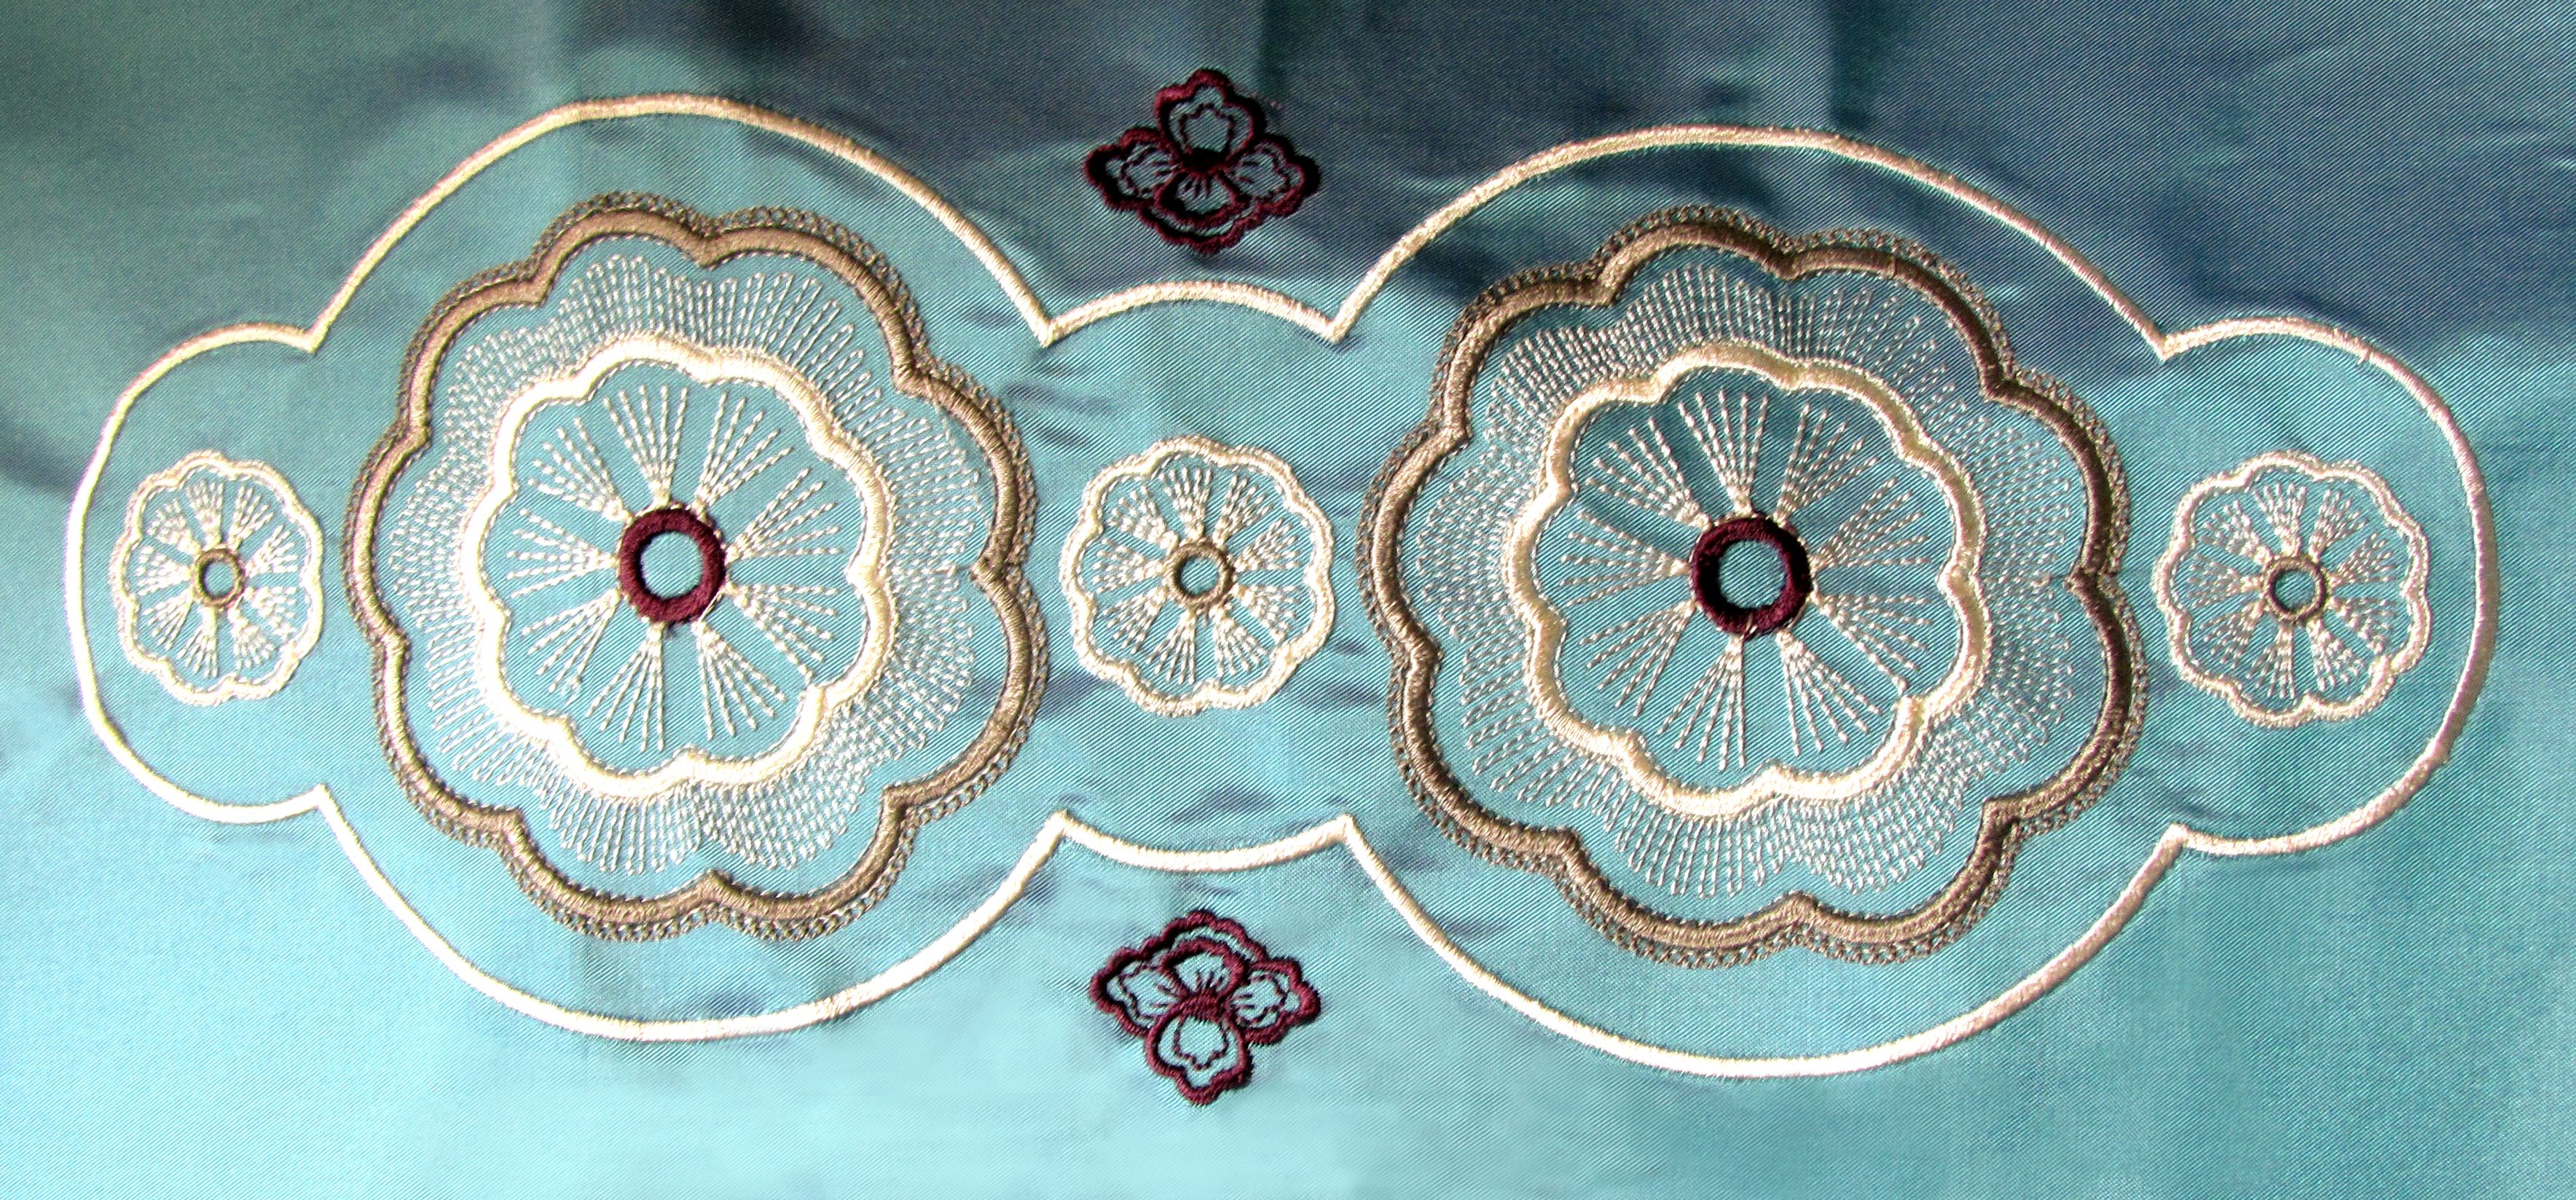 hoffman-border-embroidery